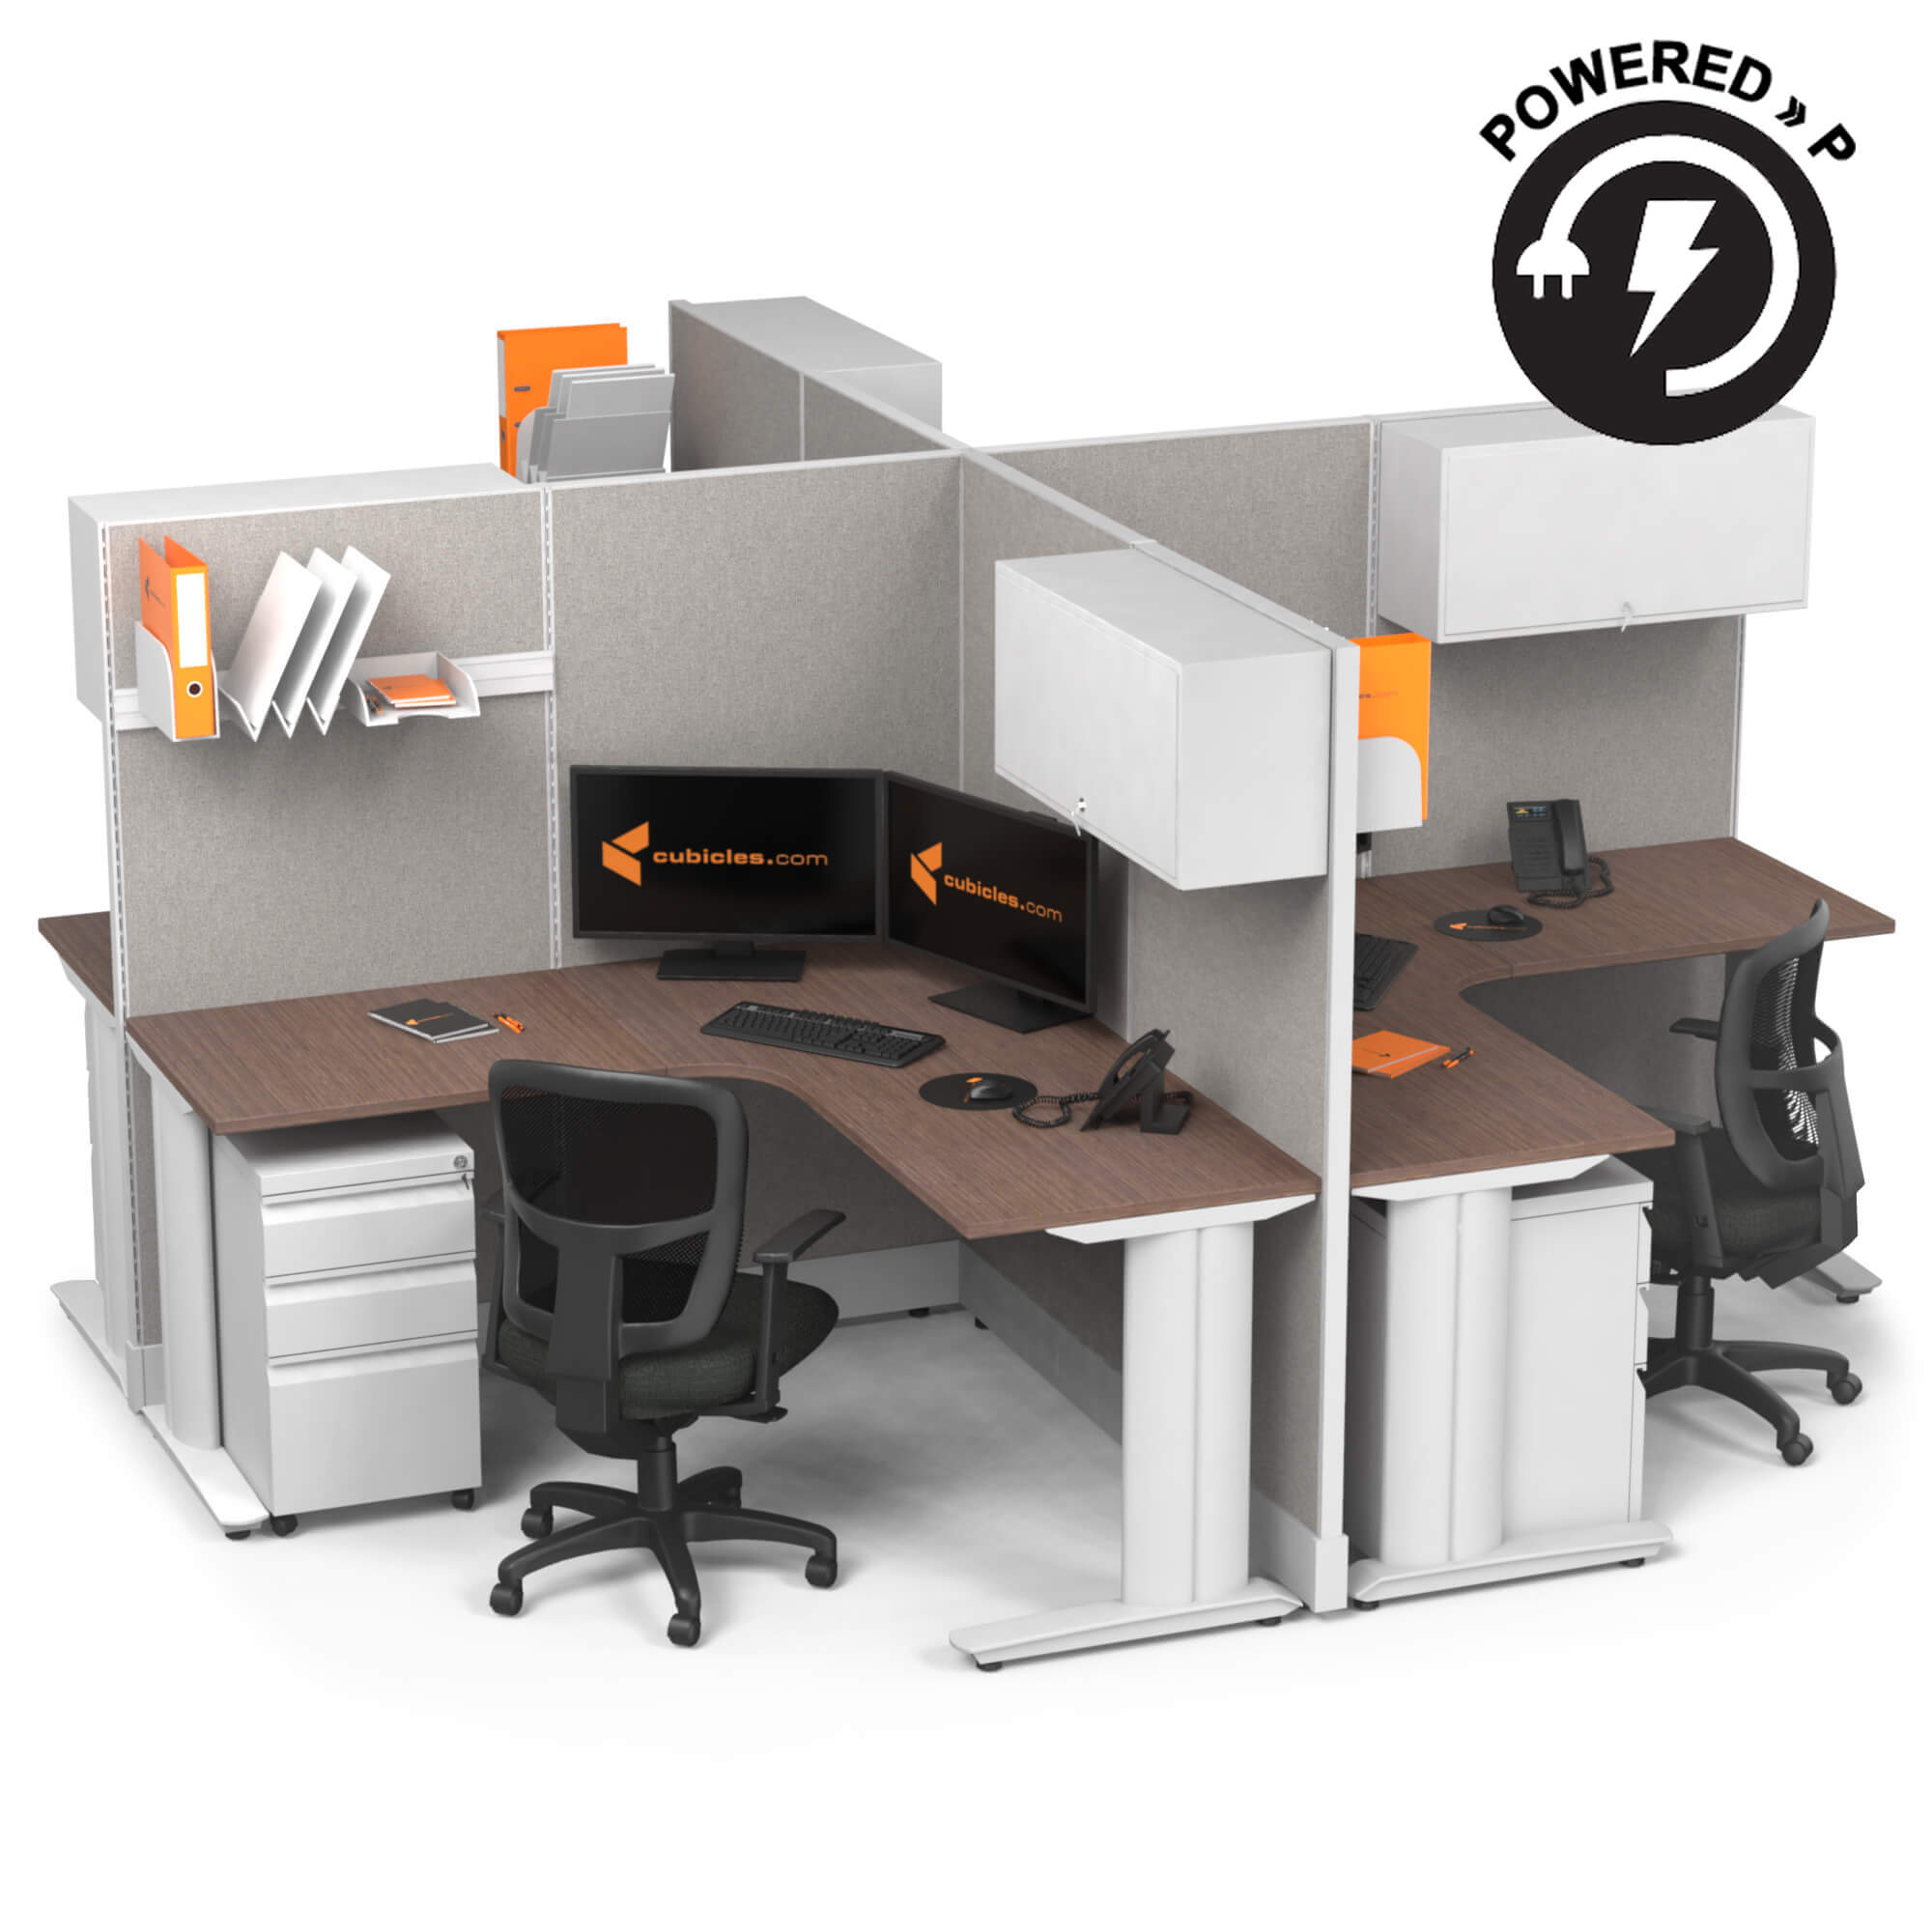 cubicle-desk-l-shaped-with-storage-4pack-x-cluster-p.jpg